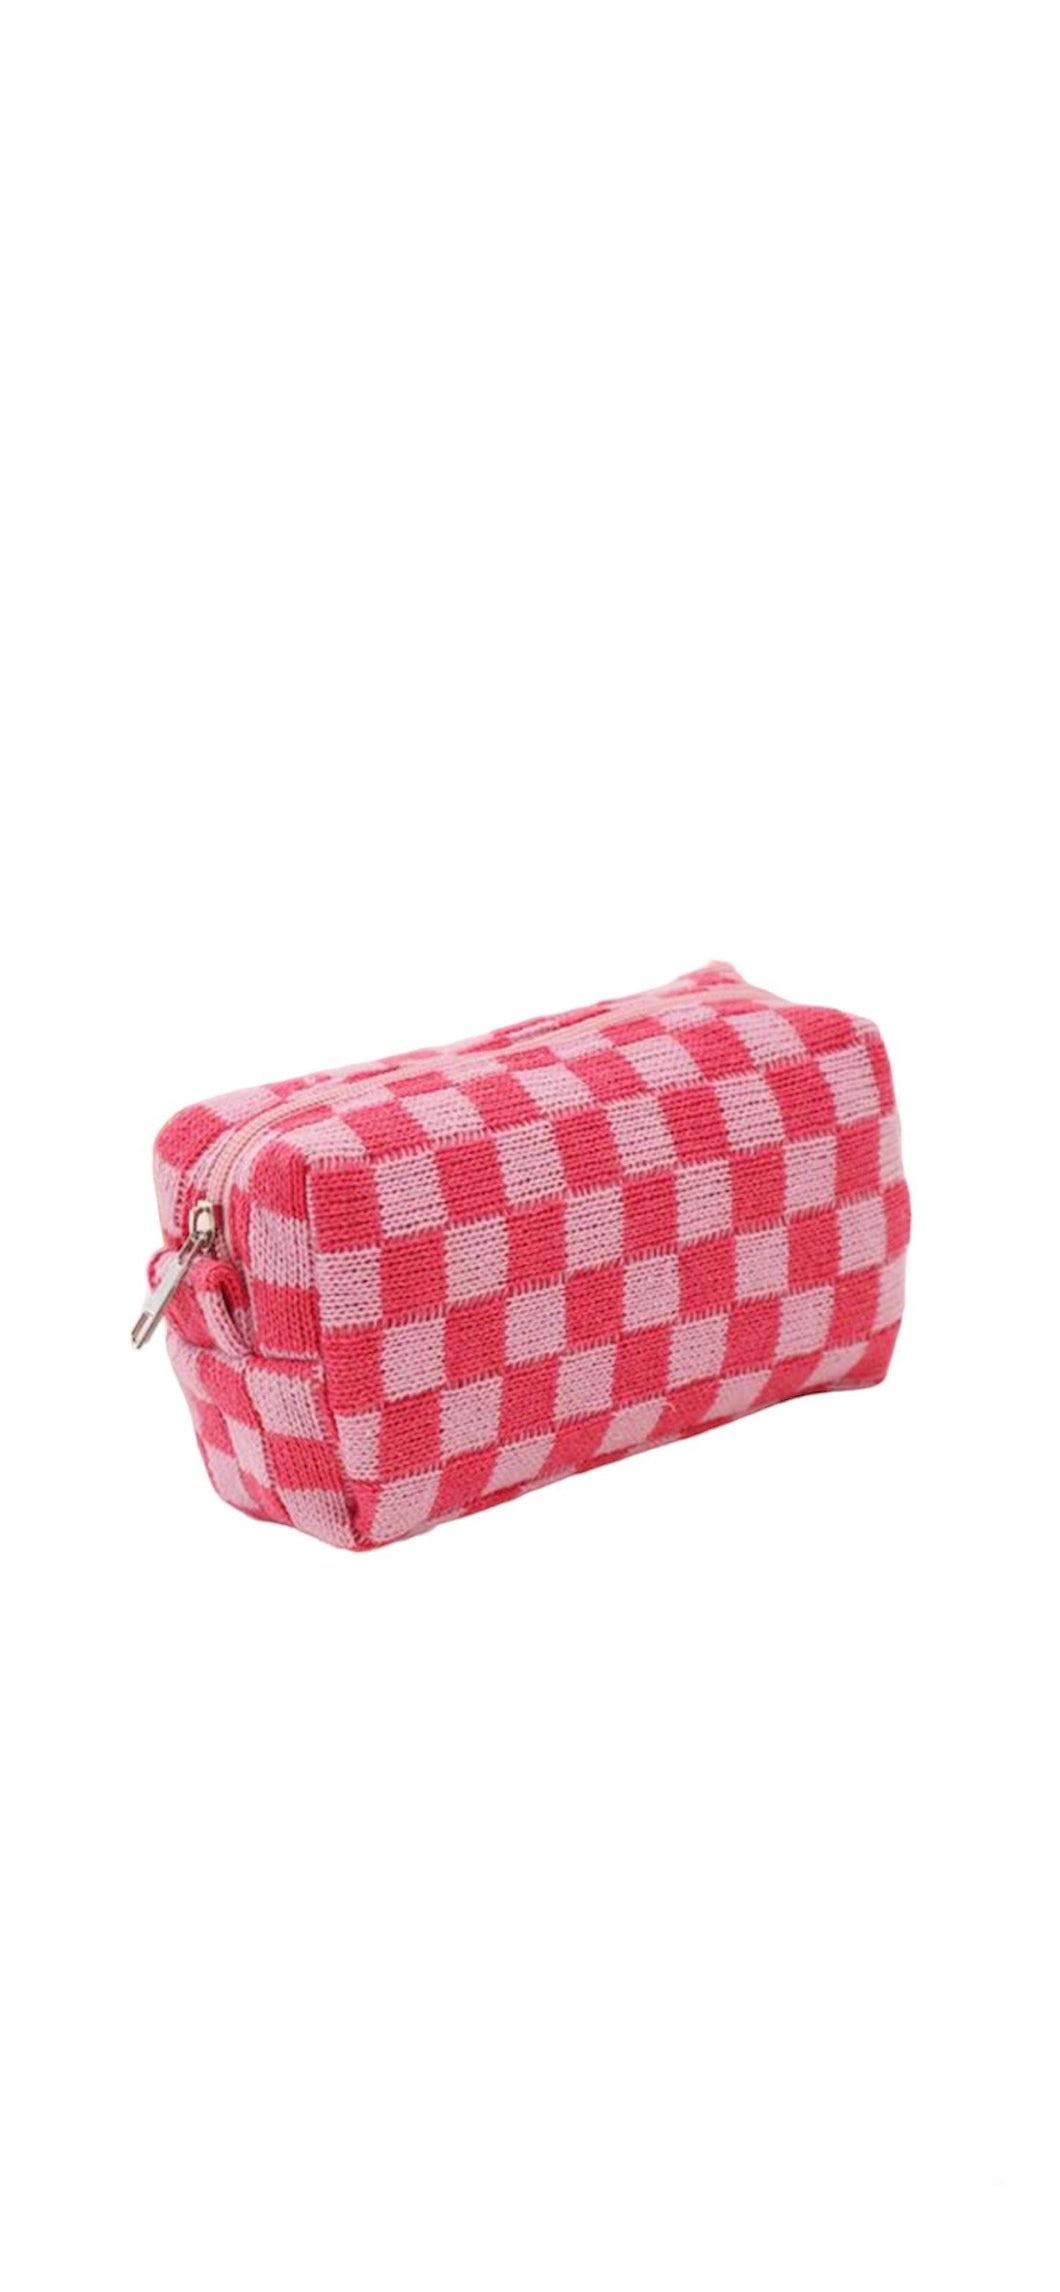 Blocked Toiletry Bag Mini - Different Colors